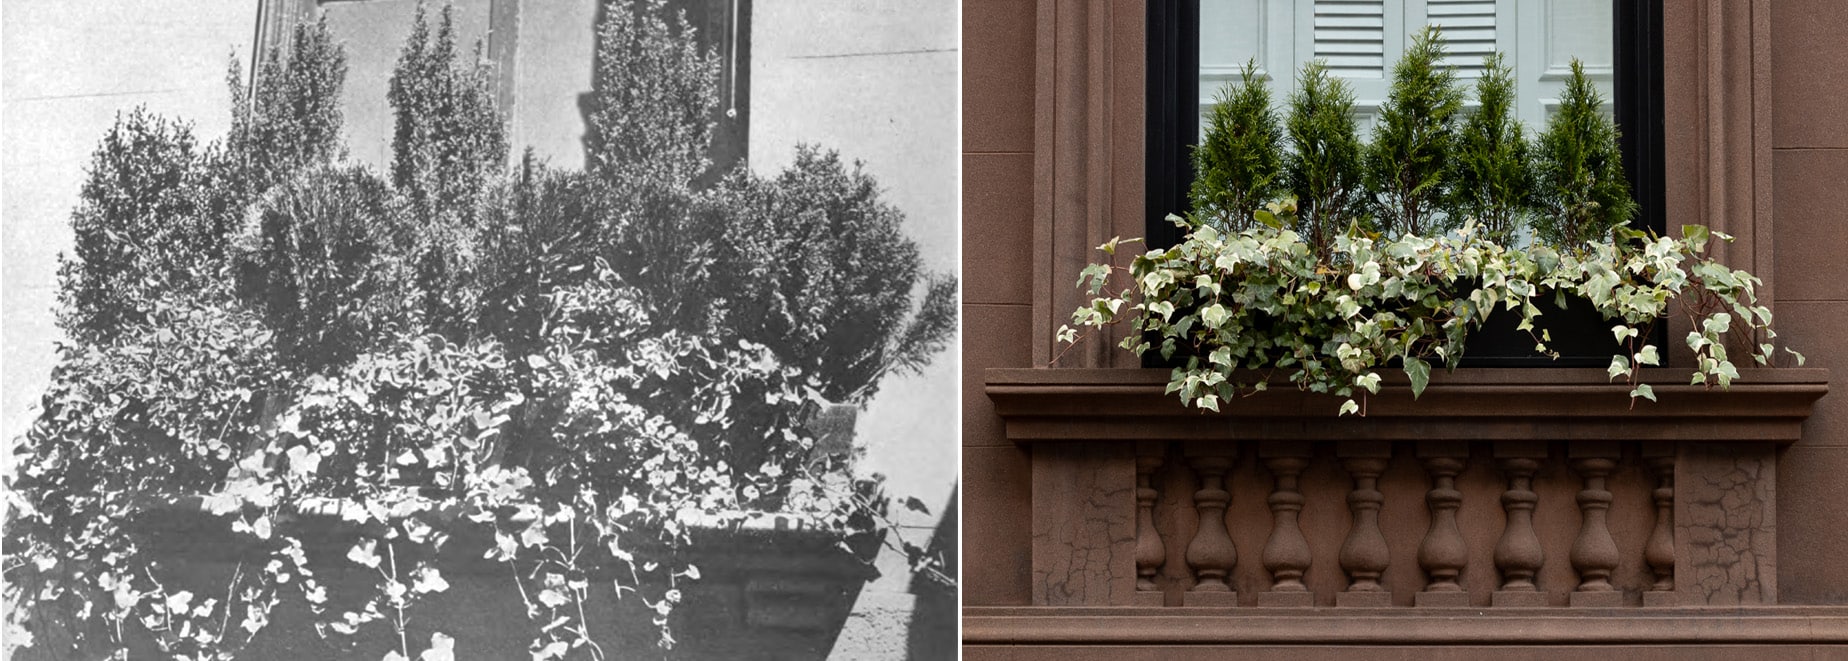 a black and white photo of a window box and a recent window box with shrubs and ivy